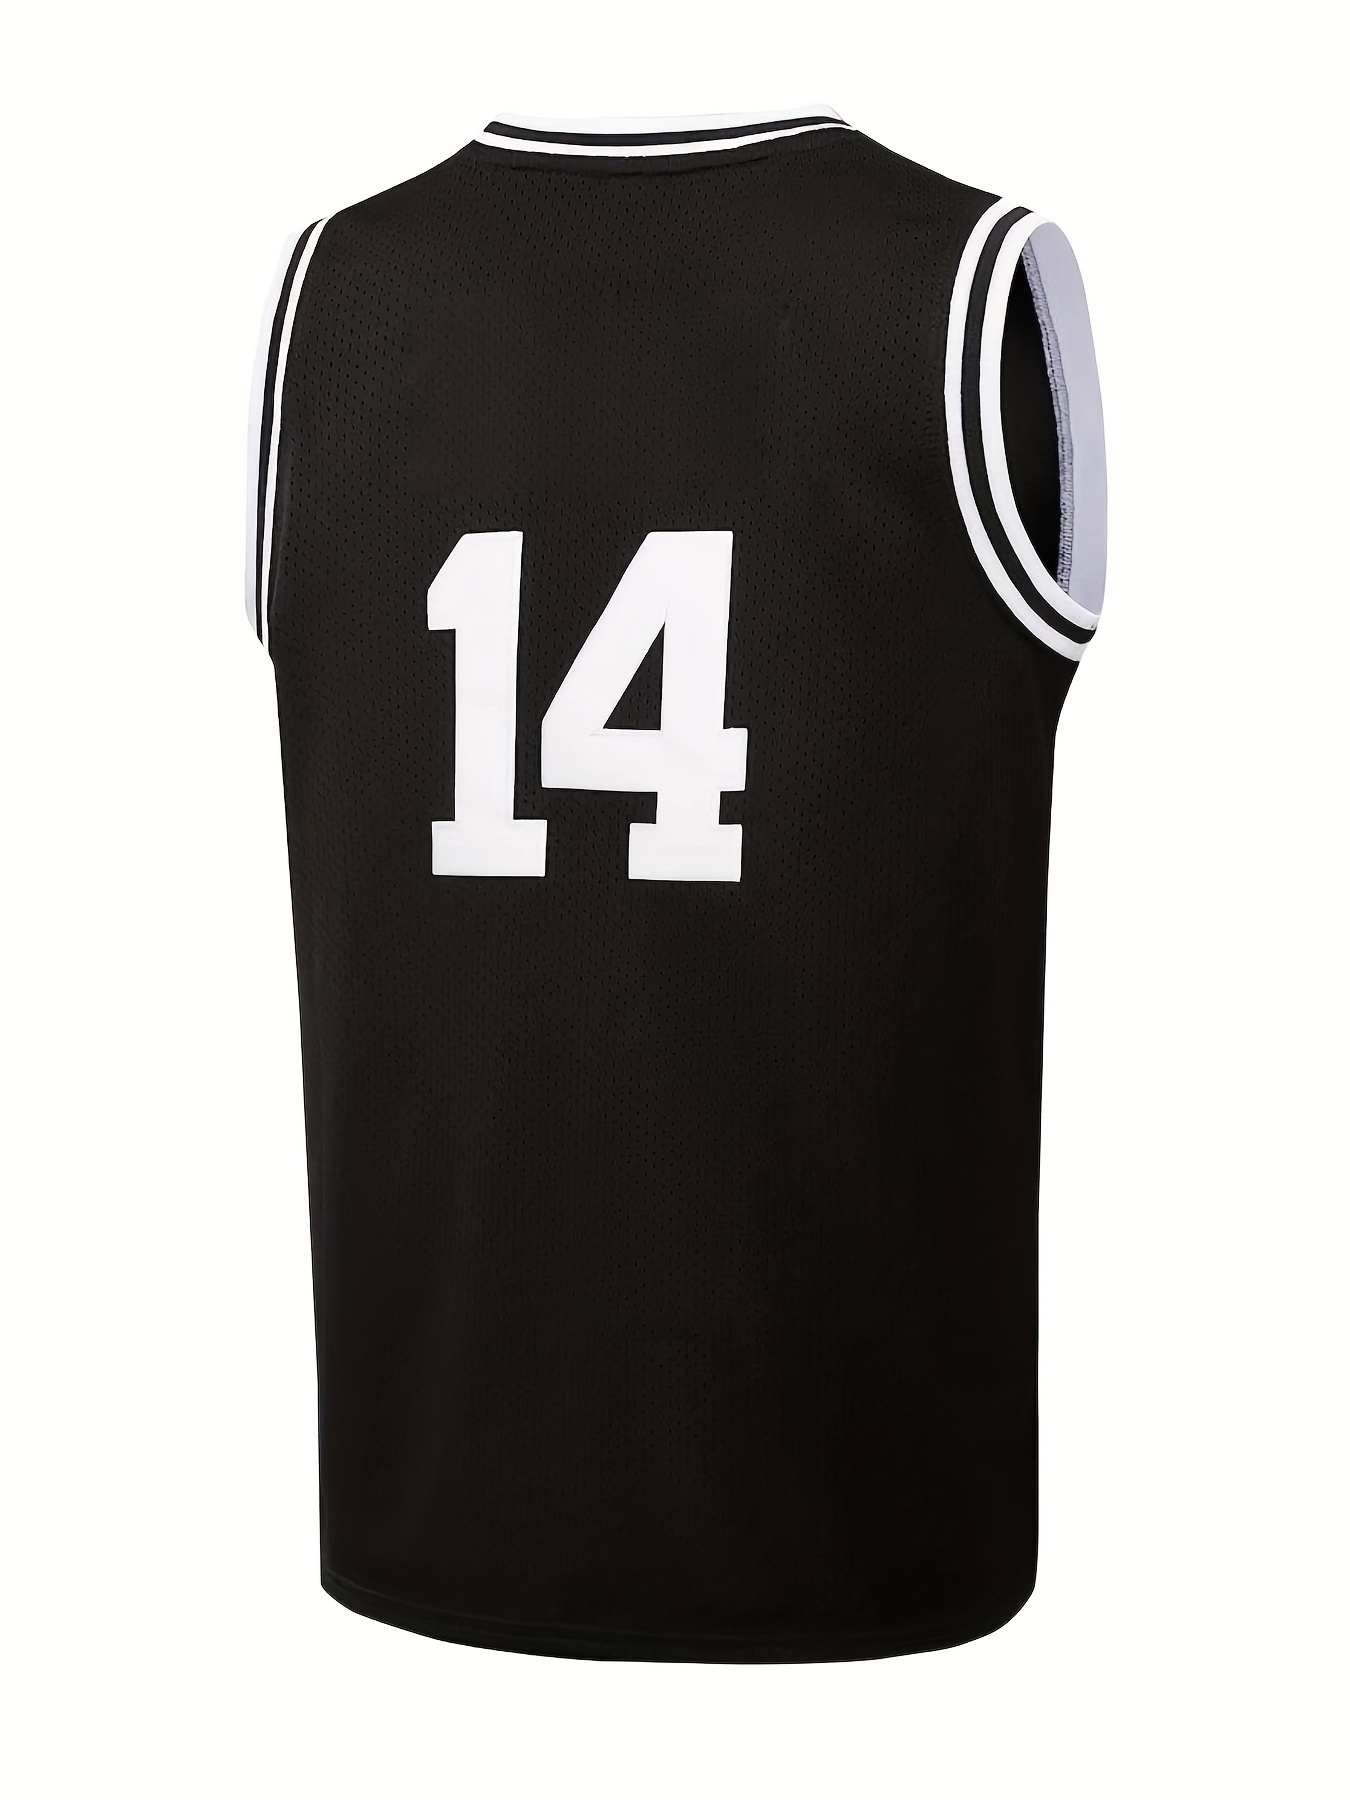 Custom Basketball Jersey 90's Hip Hop Stitched & Printed Letters Number,  Sports Jerseys For Men/Boy